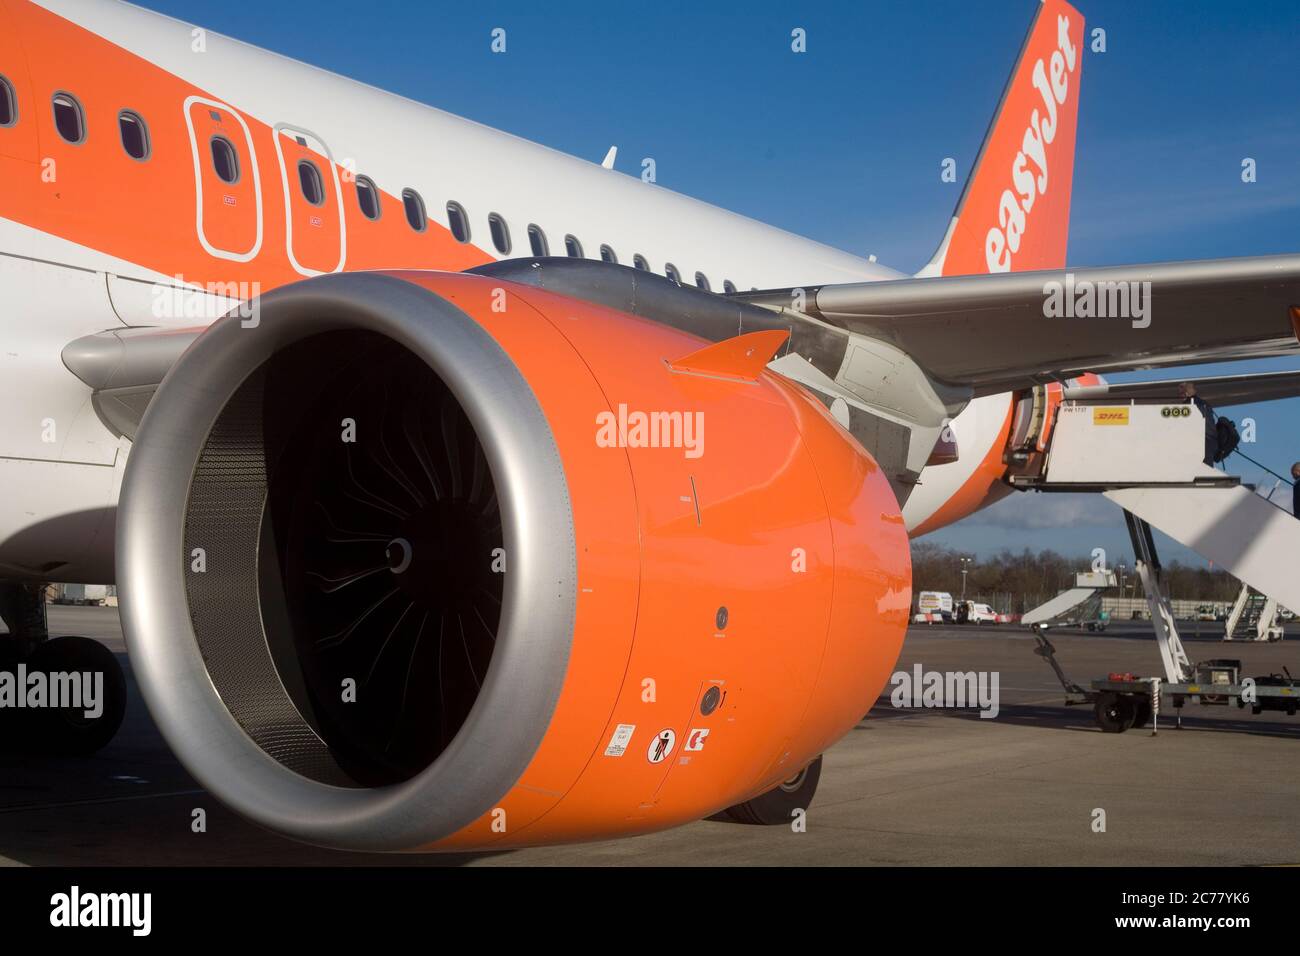 Jet aeroplane oprated by Easyjet on the ground at Bristol airport on a sunny winter day Stock Photo